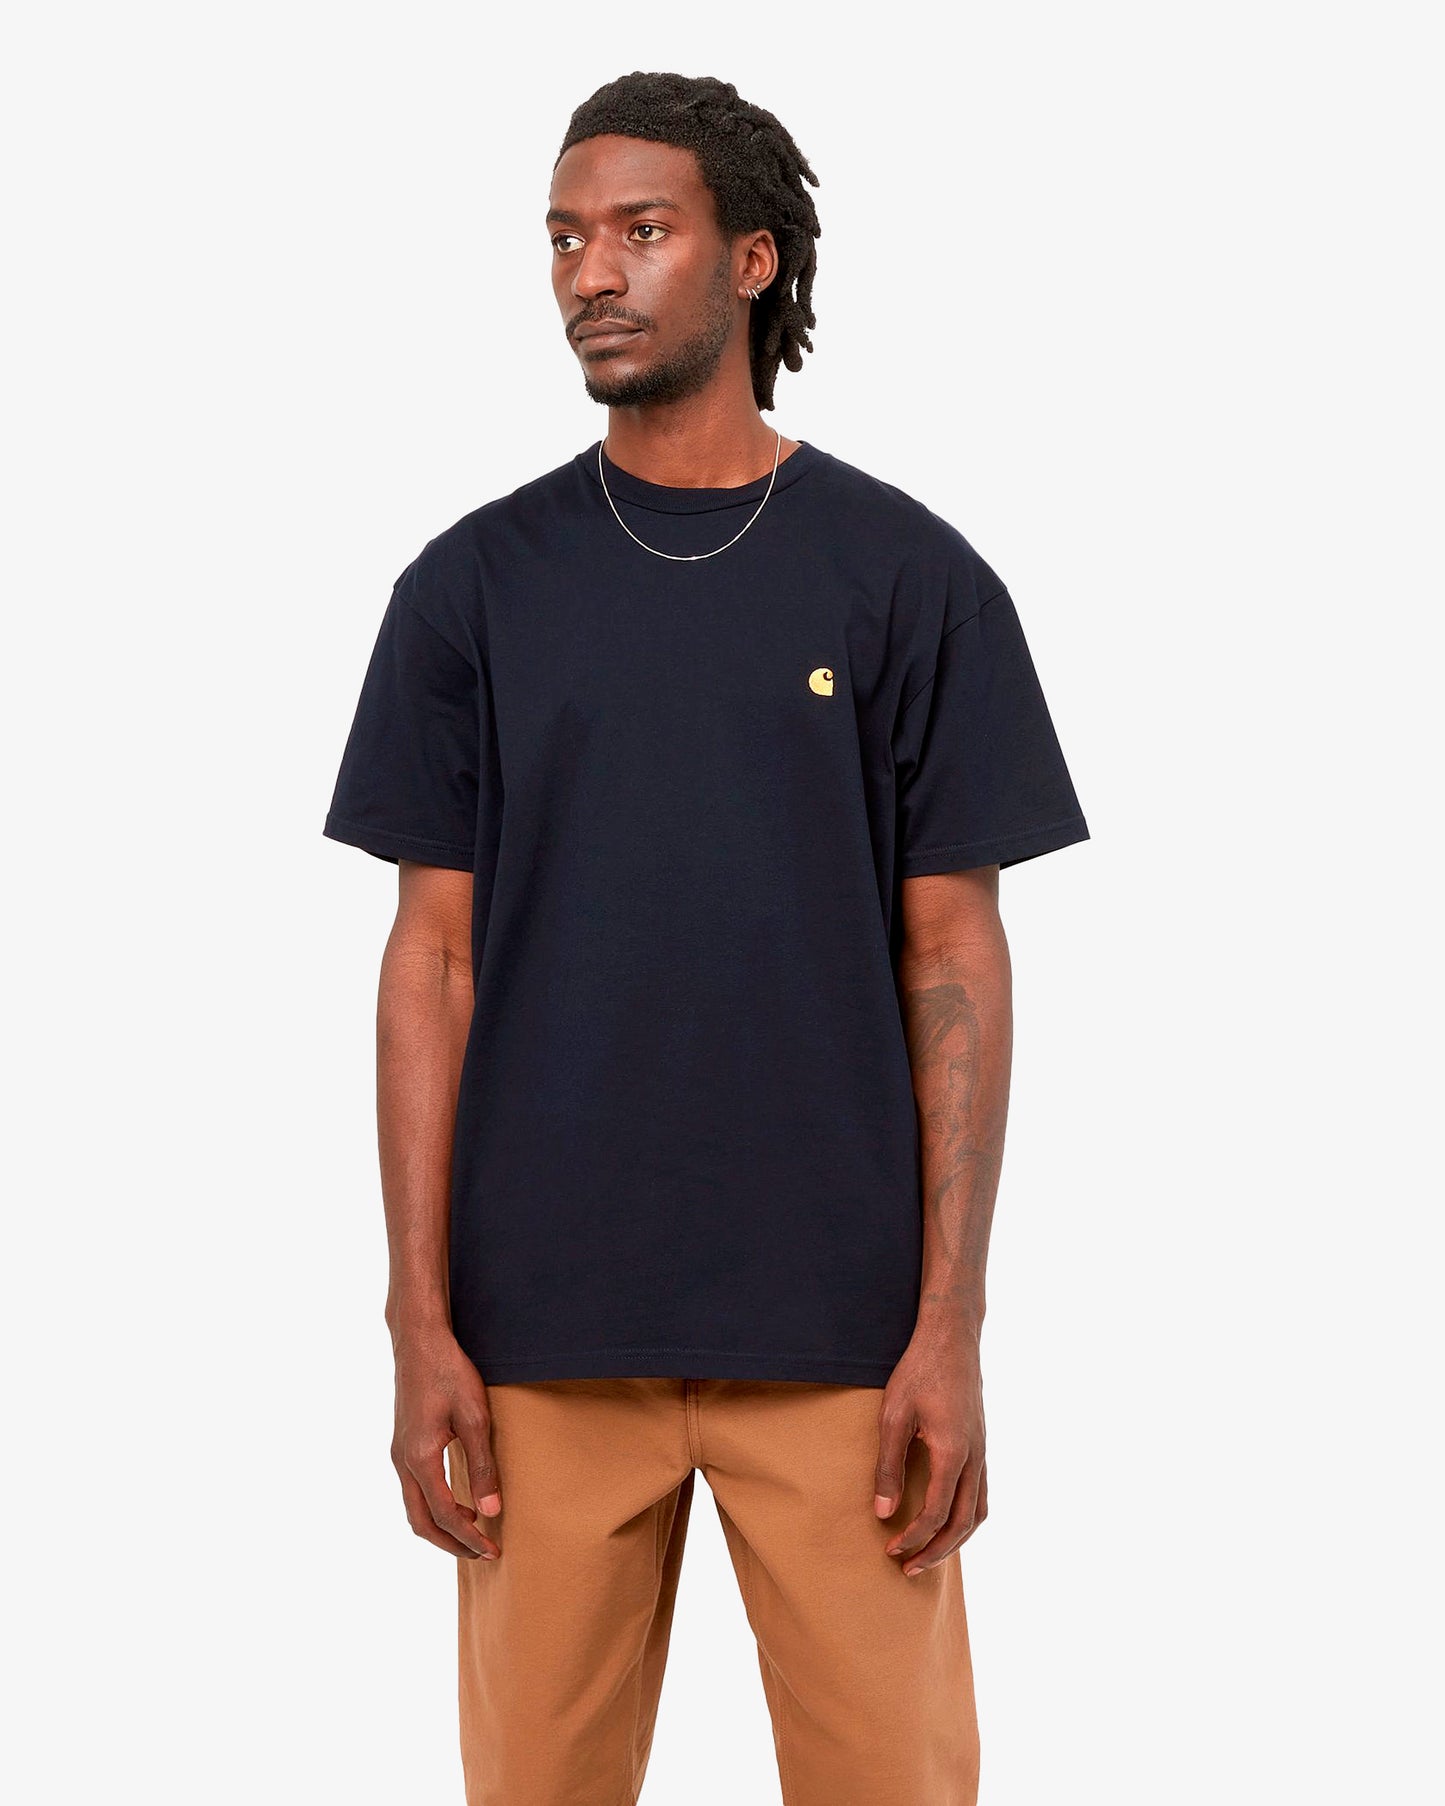 Carhartt WIP S/S Chase T-shirt